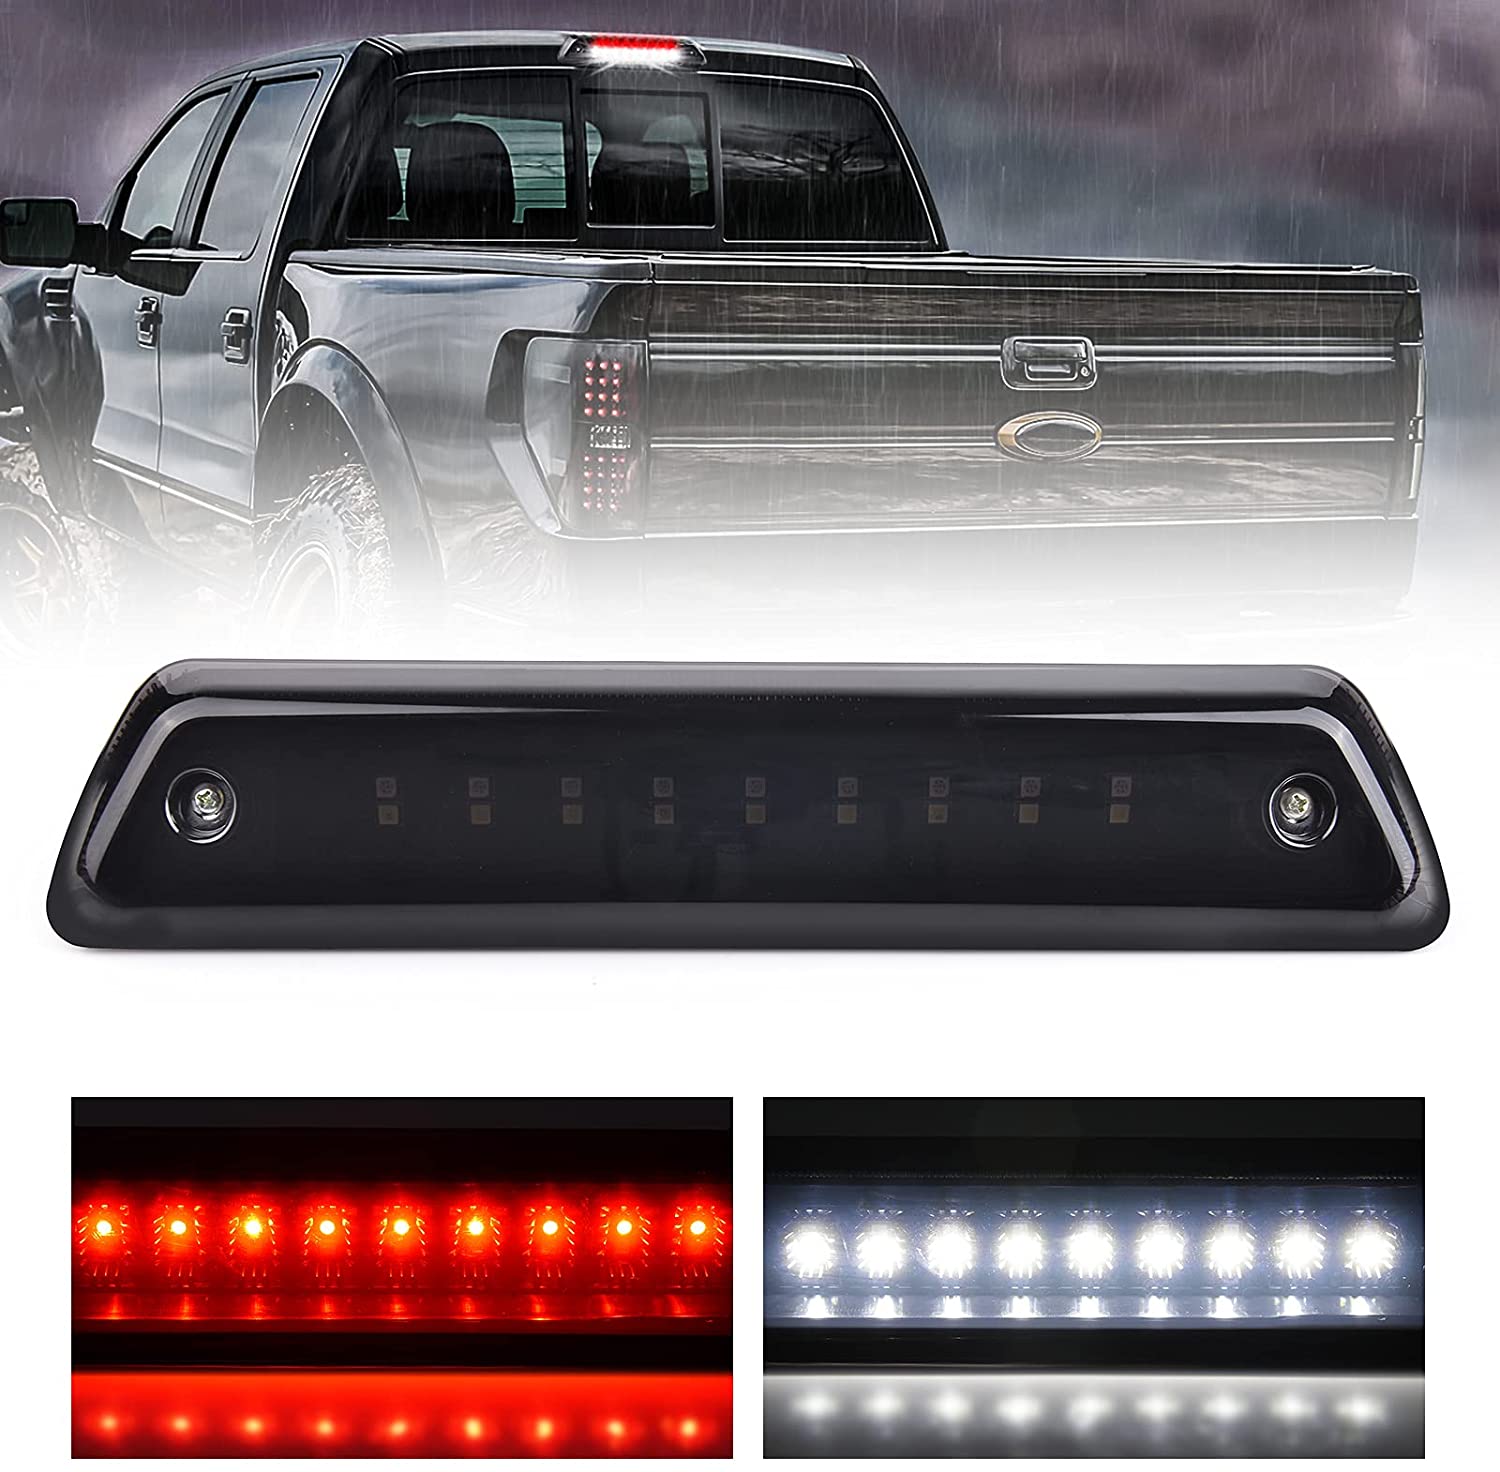 Red/White 3rd LED Brake/Reverse Light High Mount Rear Cab Cargo Lamp Compatible with 2009-2014 F150 -  Somked